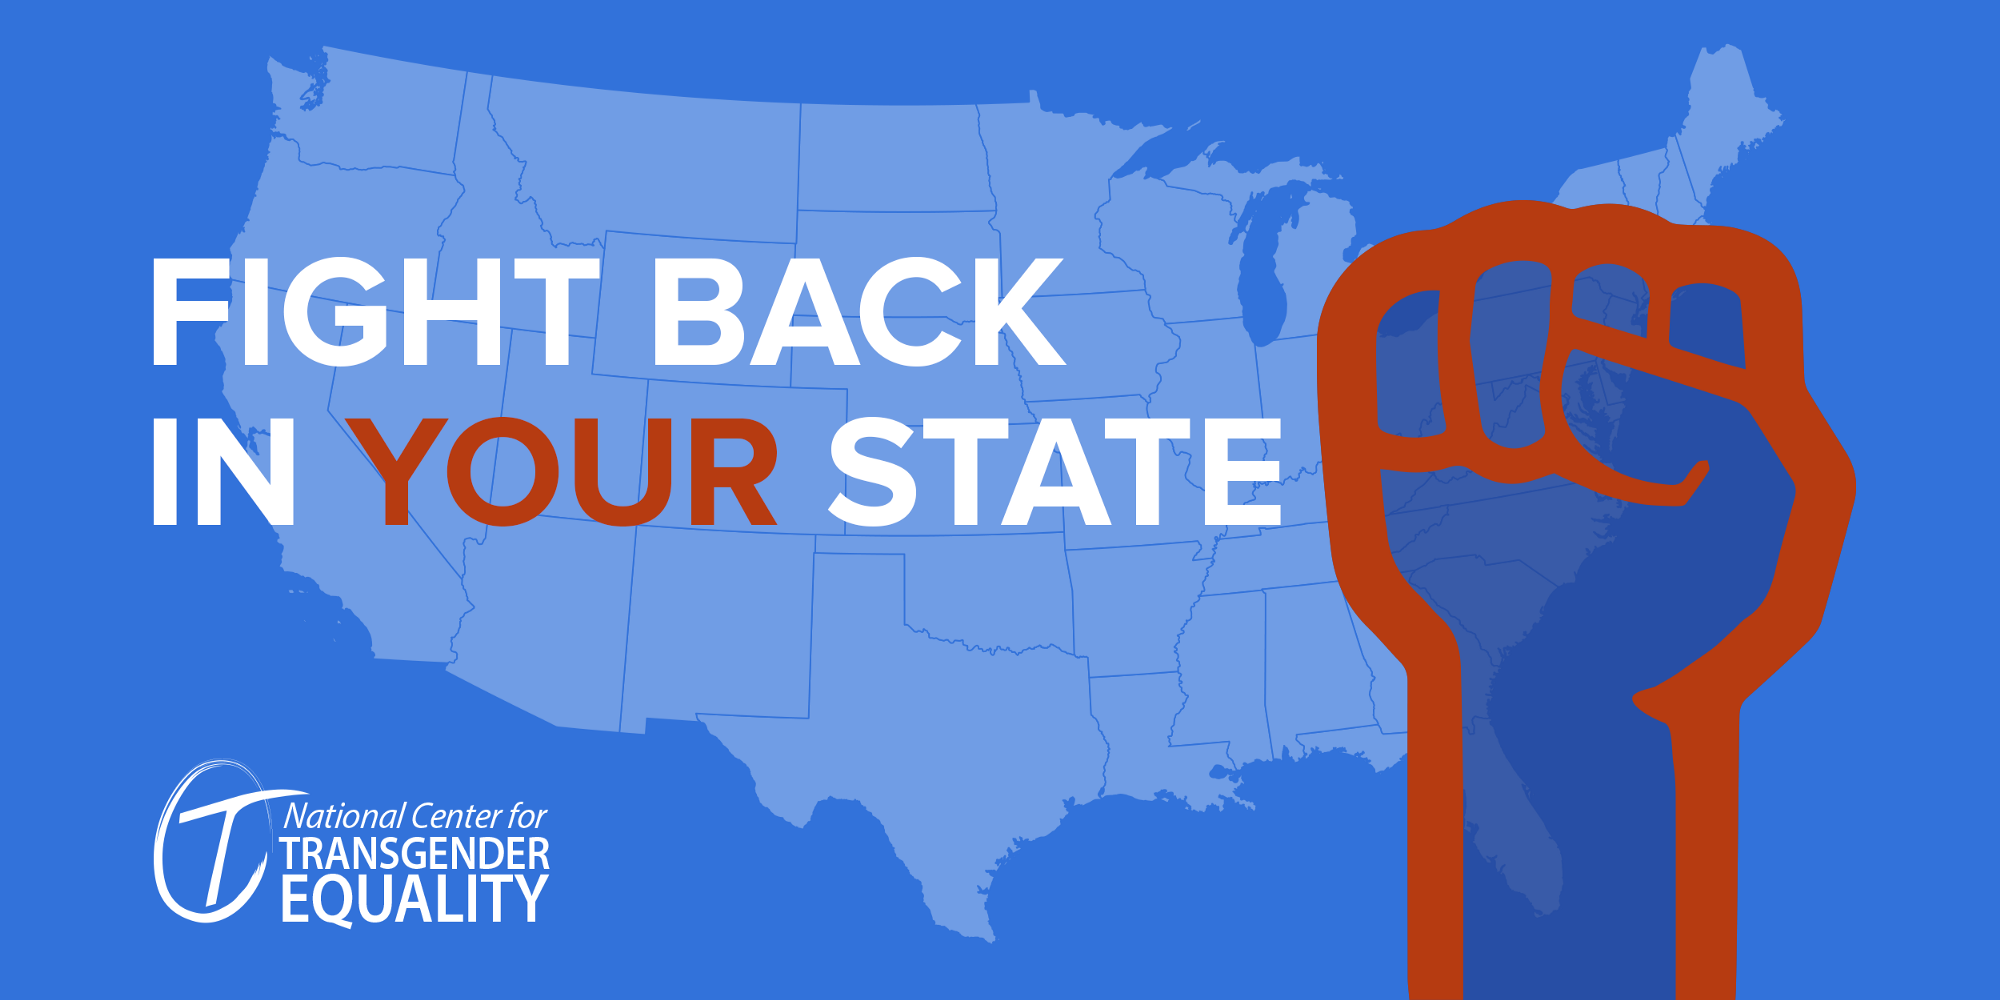 A graphic showing the United States' silhouette in the background. Overlaid is text saying, "Fight back in your state!" and a graphic of a fist.